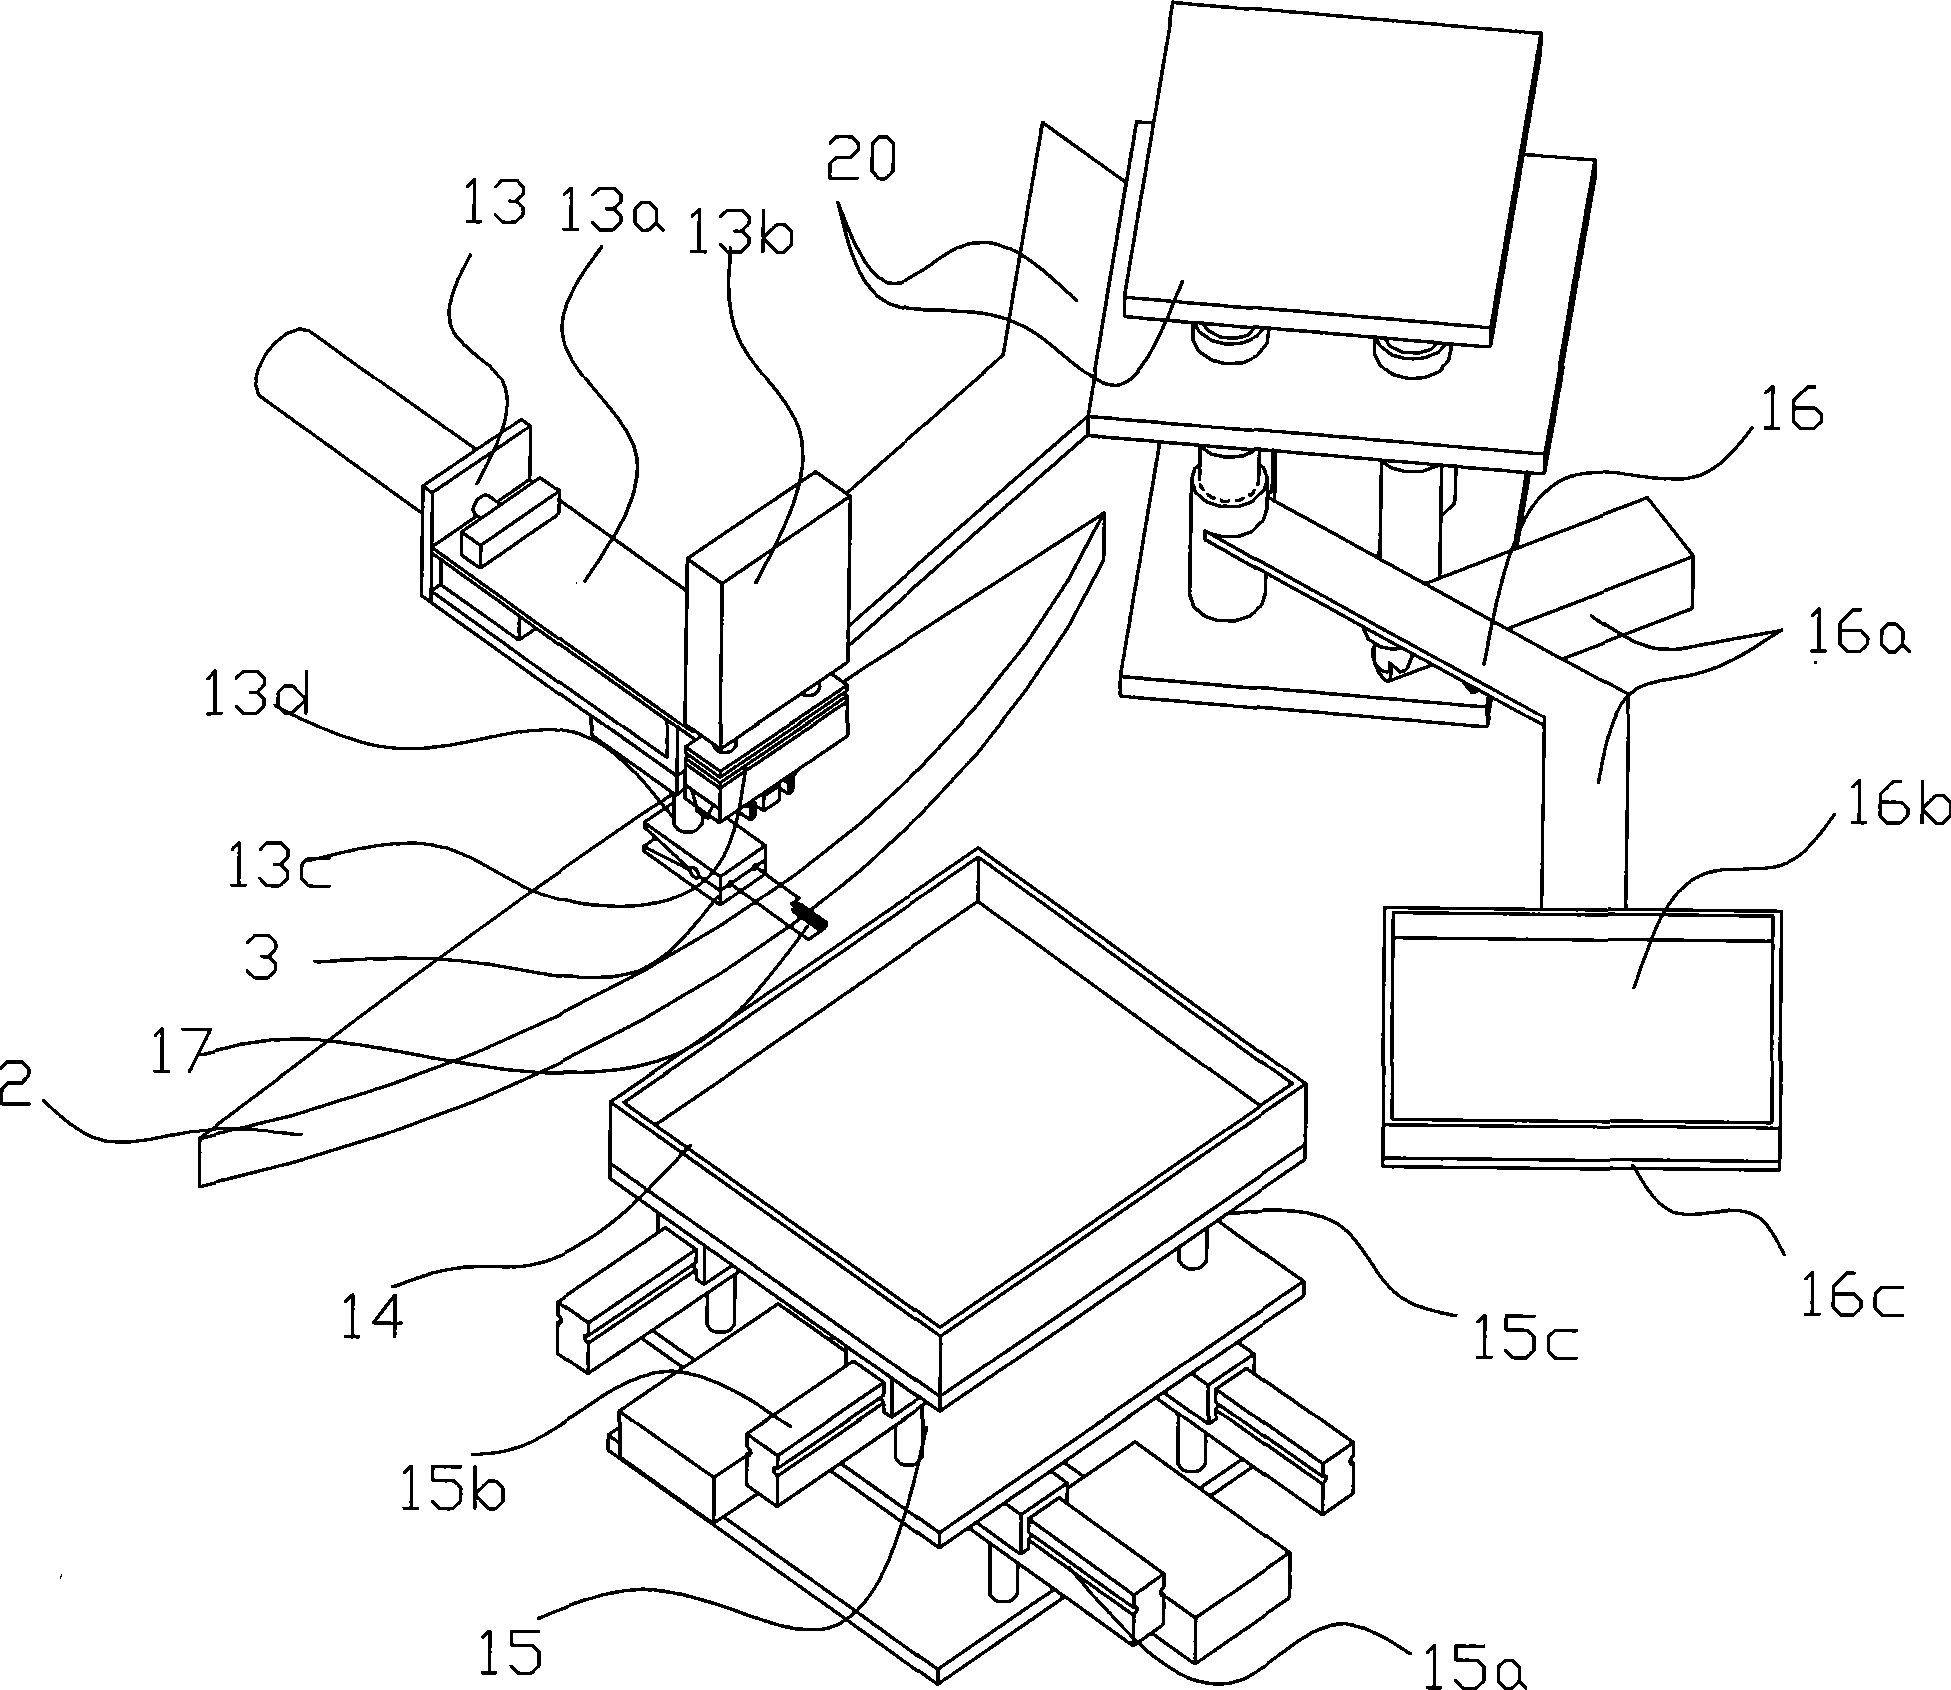 Production apparatus for lamp holder and lamp filament component of highly efficient multi-position continuous lamp